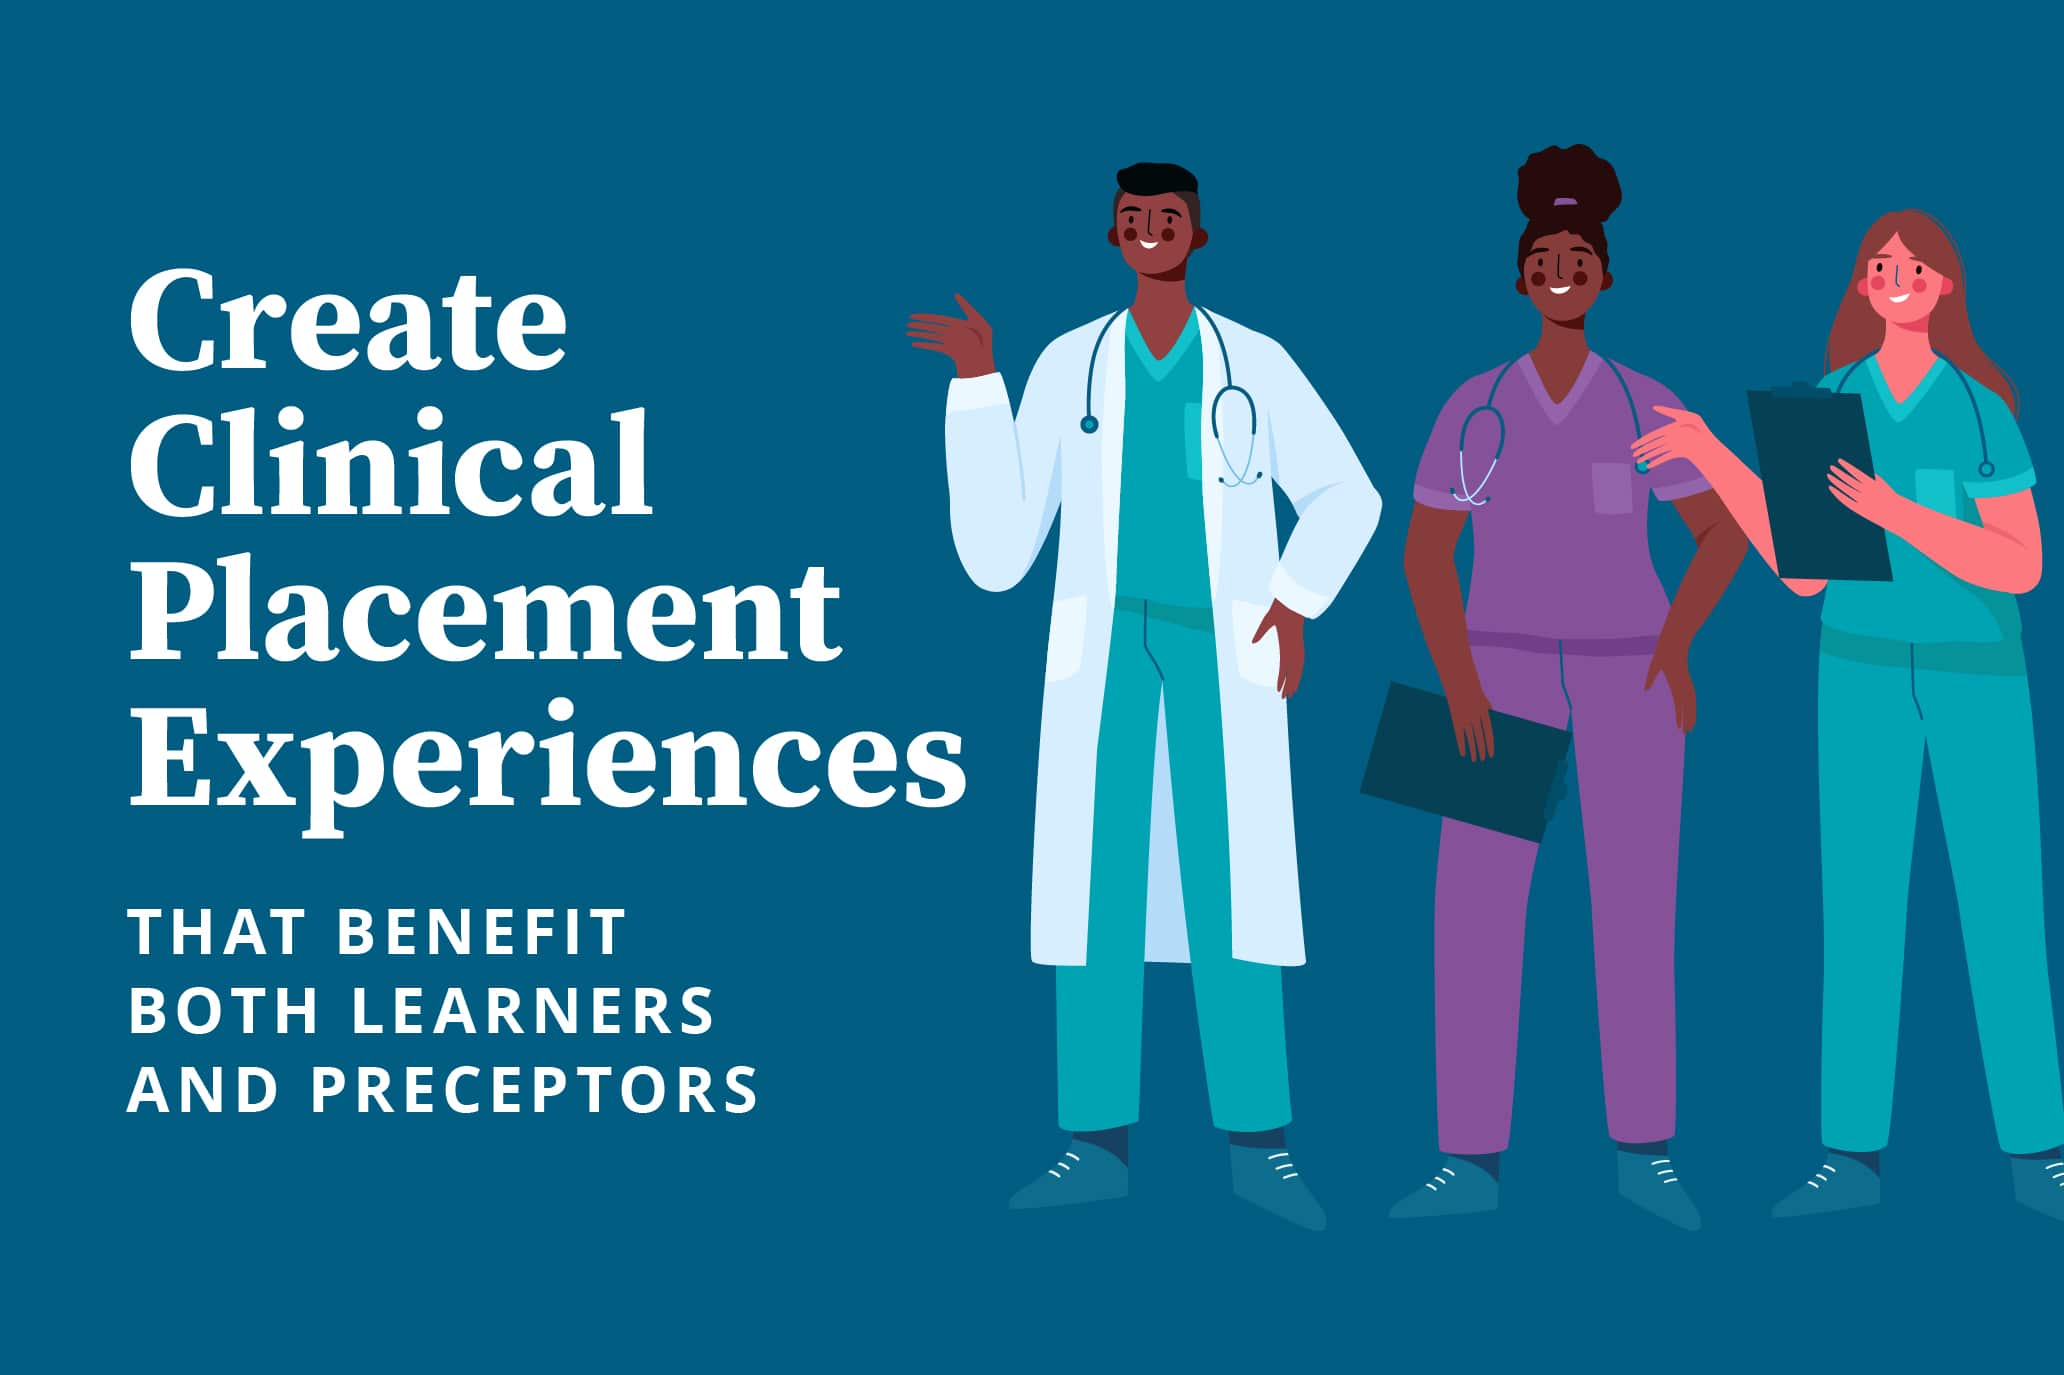 Create Clinical Placement Experiences That Benefit Both Learners and Preceptors image